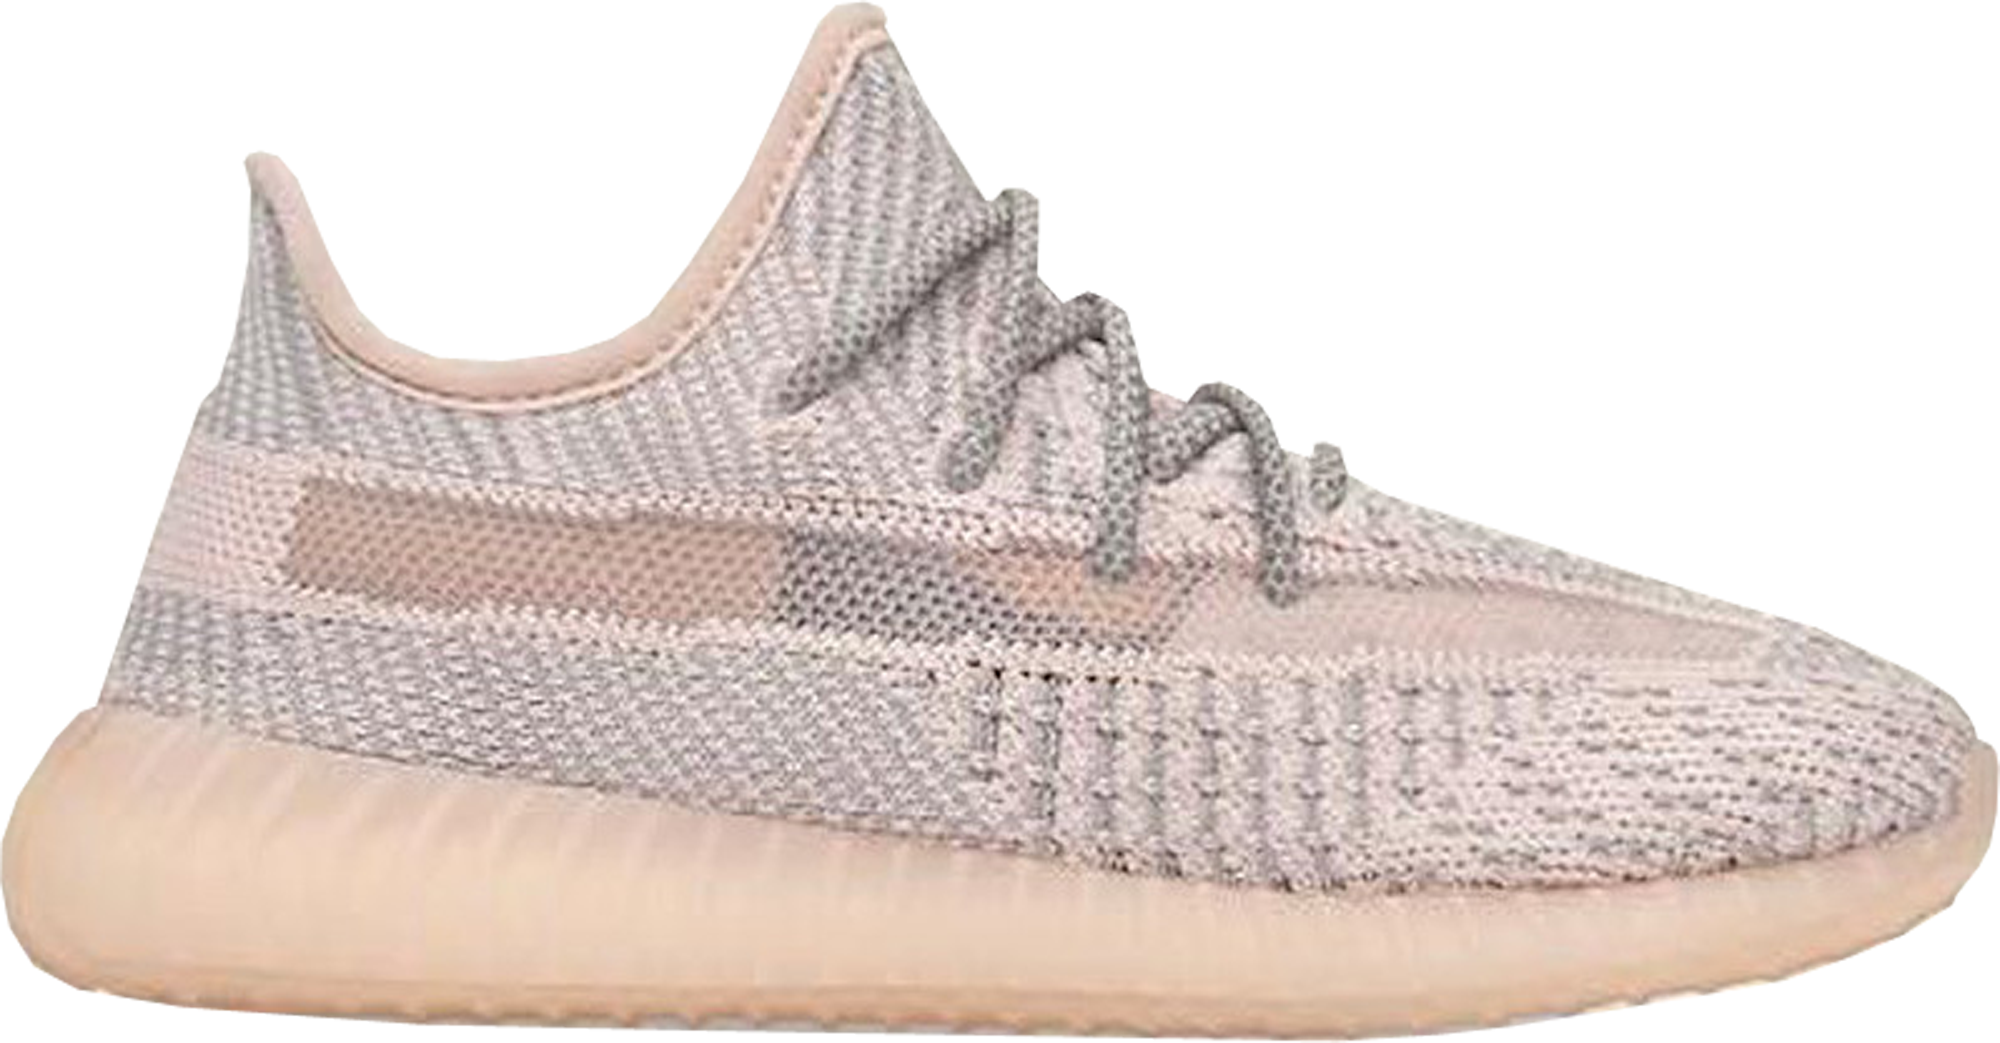 adidas Yeezy Boost 350 V2 Synth (Kids 